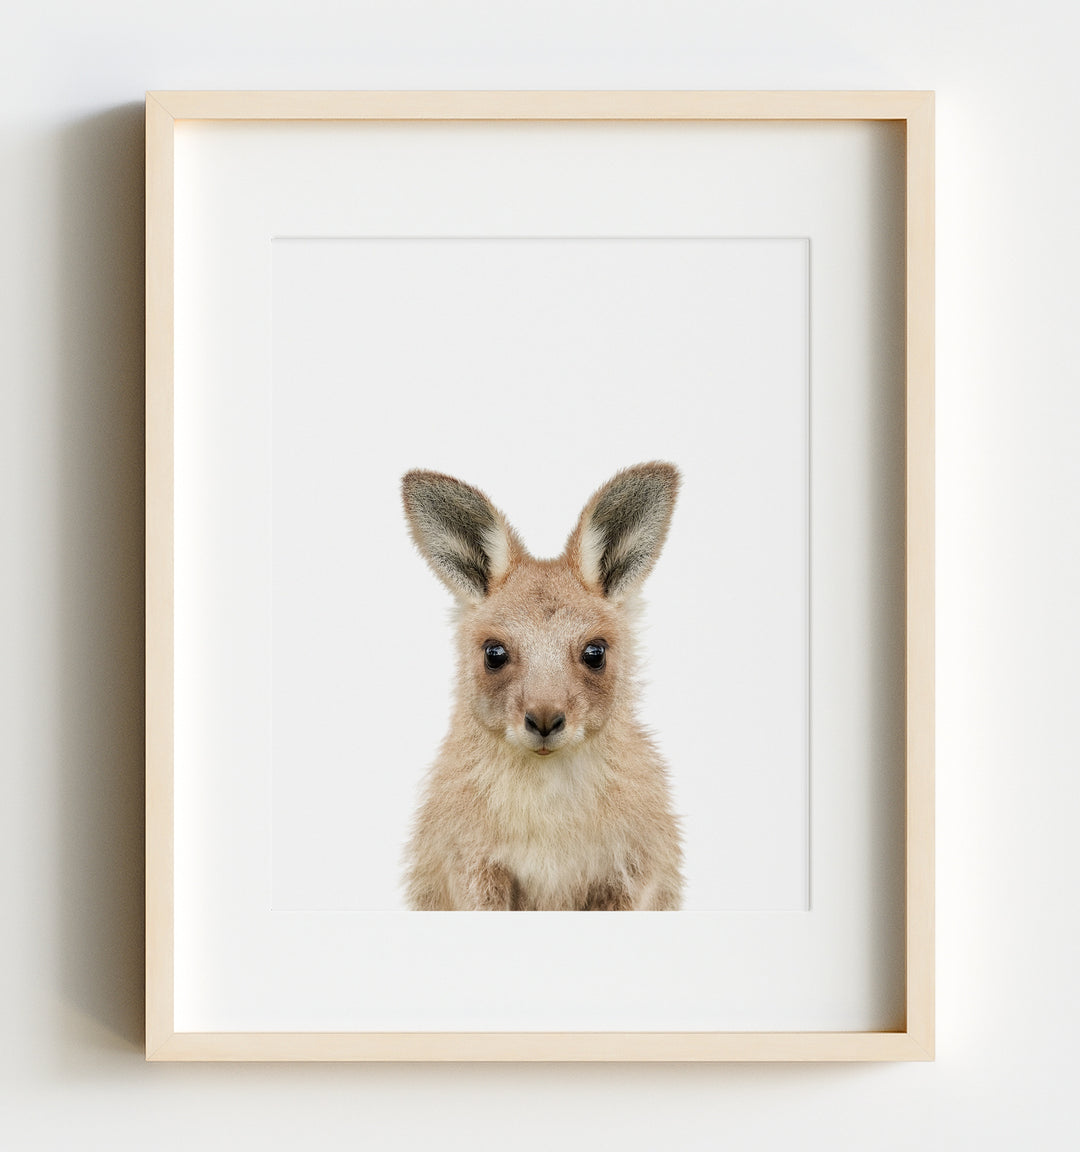 Baby Kangaroo Poster Print - Printables and Prints from our Australian Animals Collection